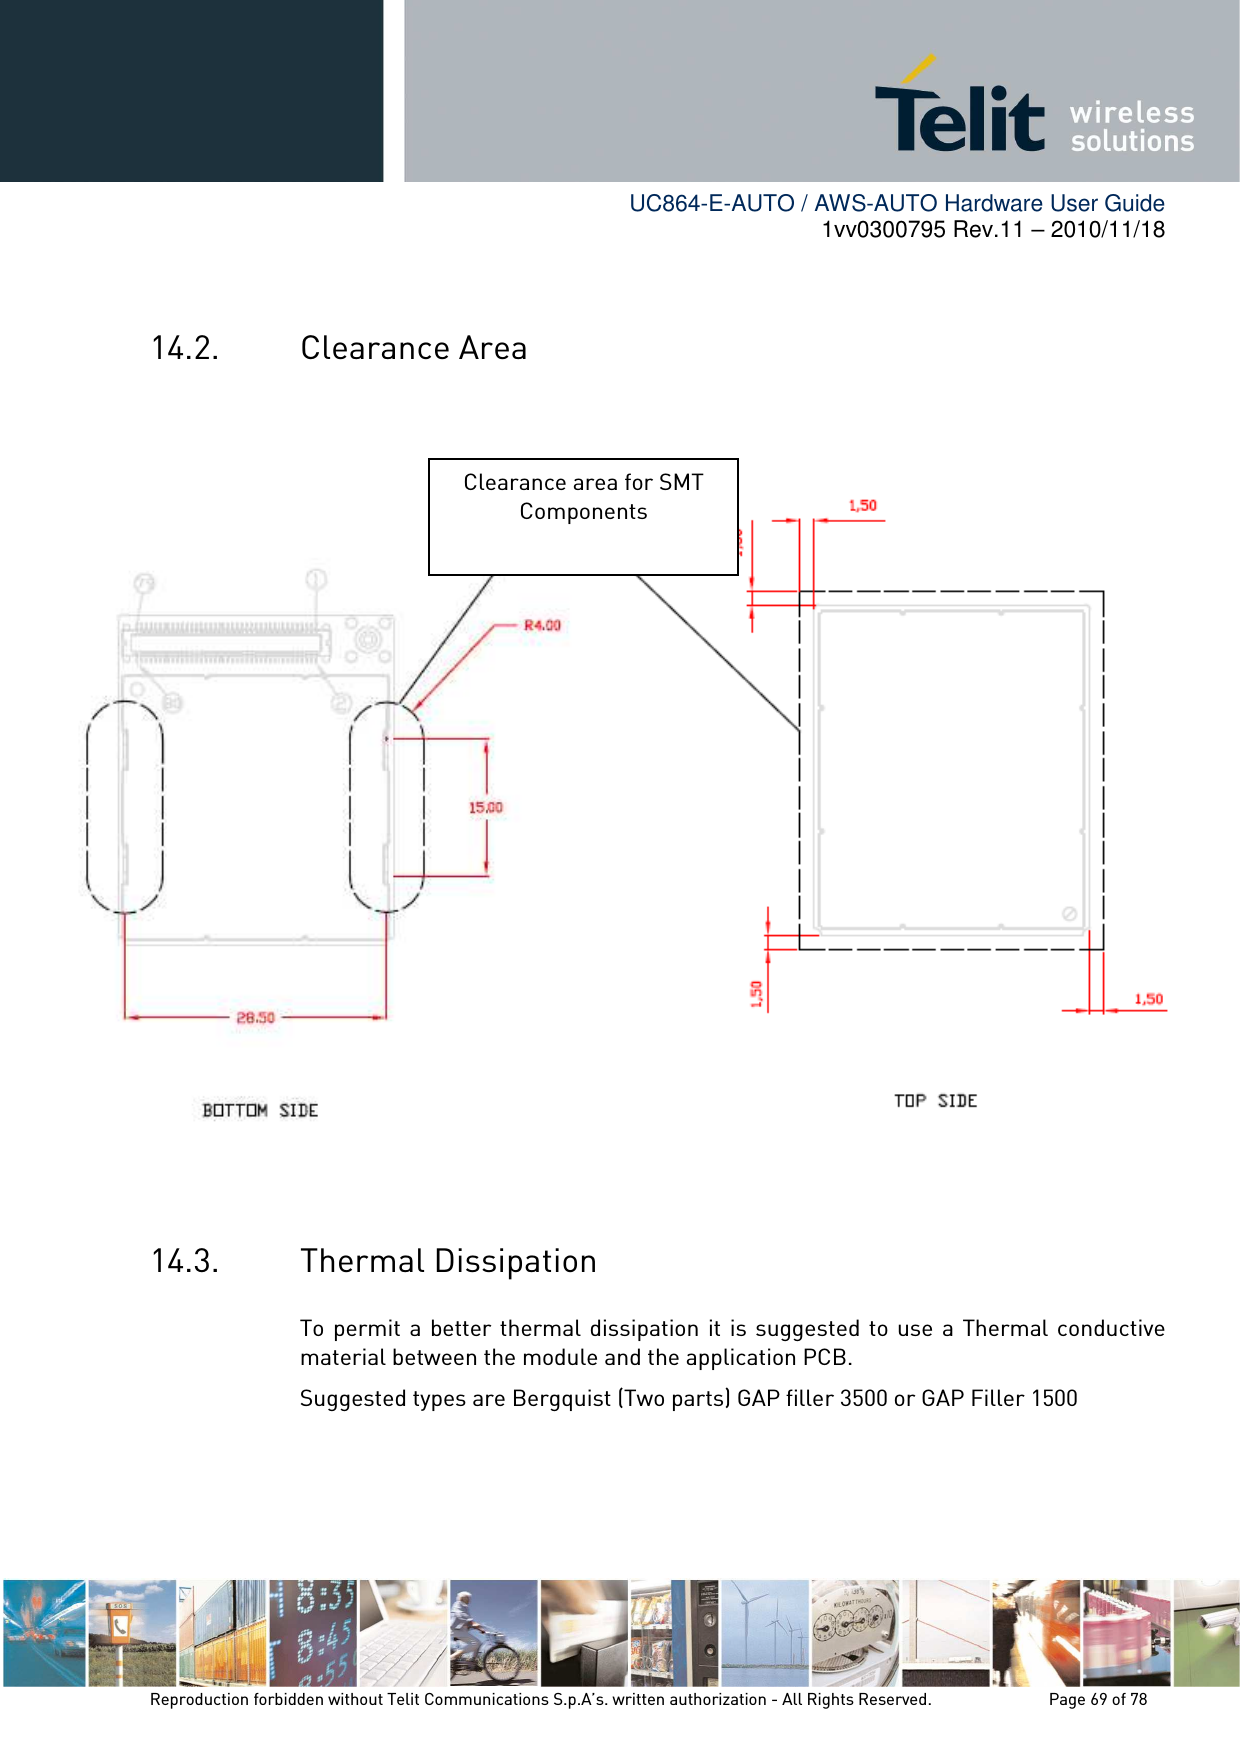        UC864-E-AUTO / AWS-AUTO Hardware User Guide 1vv0300795 Rev.11 – 2010/11/18     Reproduction forbidden without Telit Communications S.p.A’s. written authorization - All Rights Reserved.    Page 69 of 78   14.2. Clearance Area                     14.3. Thermal Dissipation To permit a better thermal dissipation it is suggested to  use  a  Thermal conductive material between the module and the application PCB. Suggested types are Bergquist (Two parts) GAP filler 3500 or GAP Filler 1500    Clearance area for SMT Components 